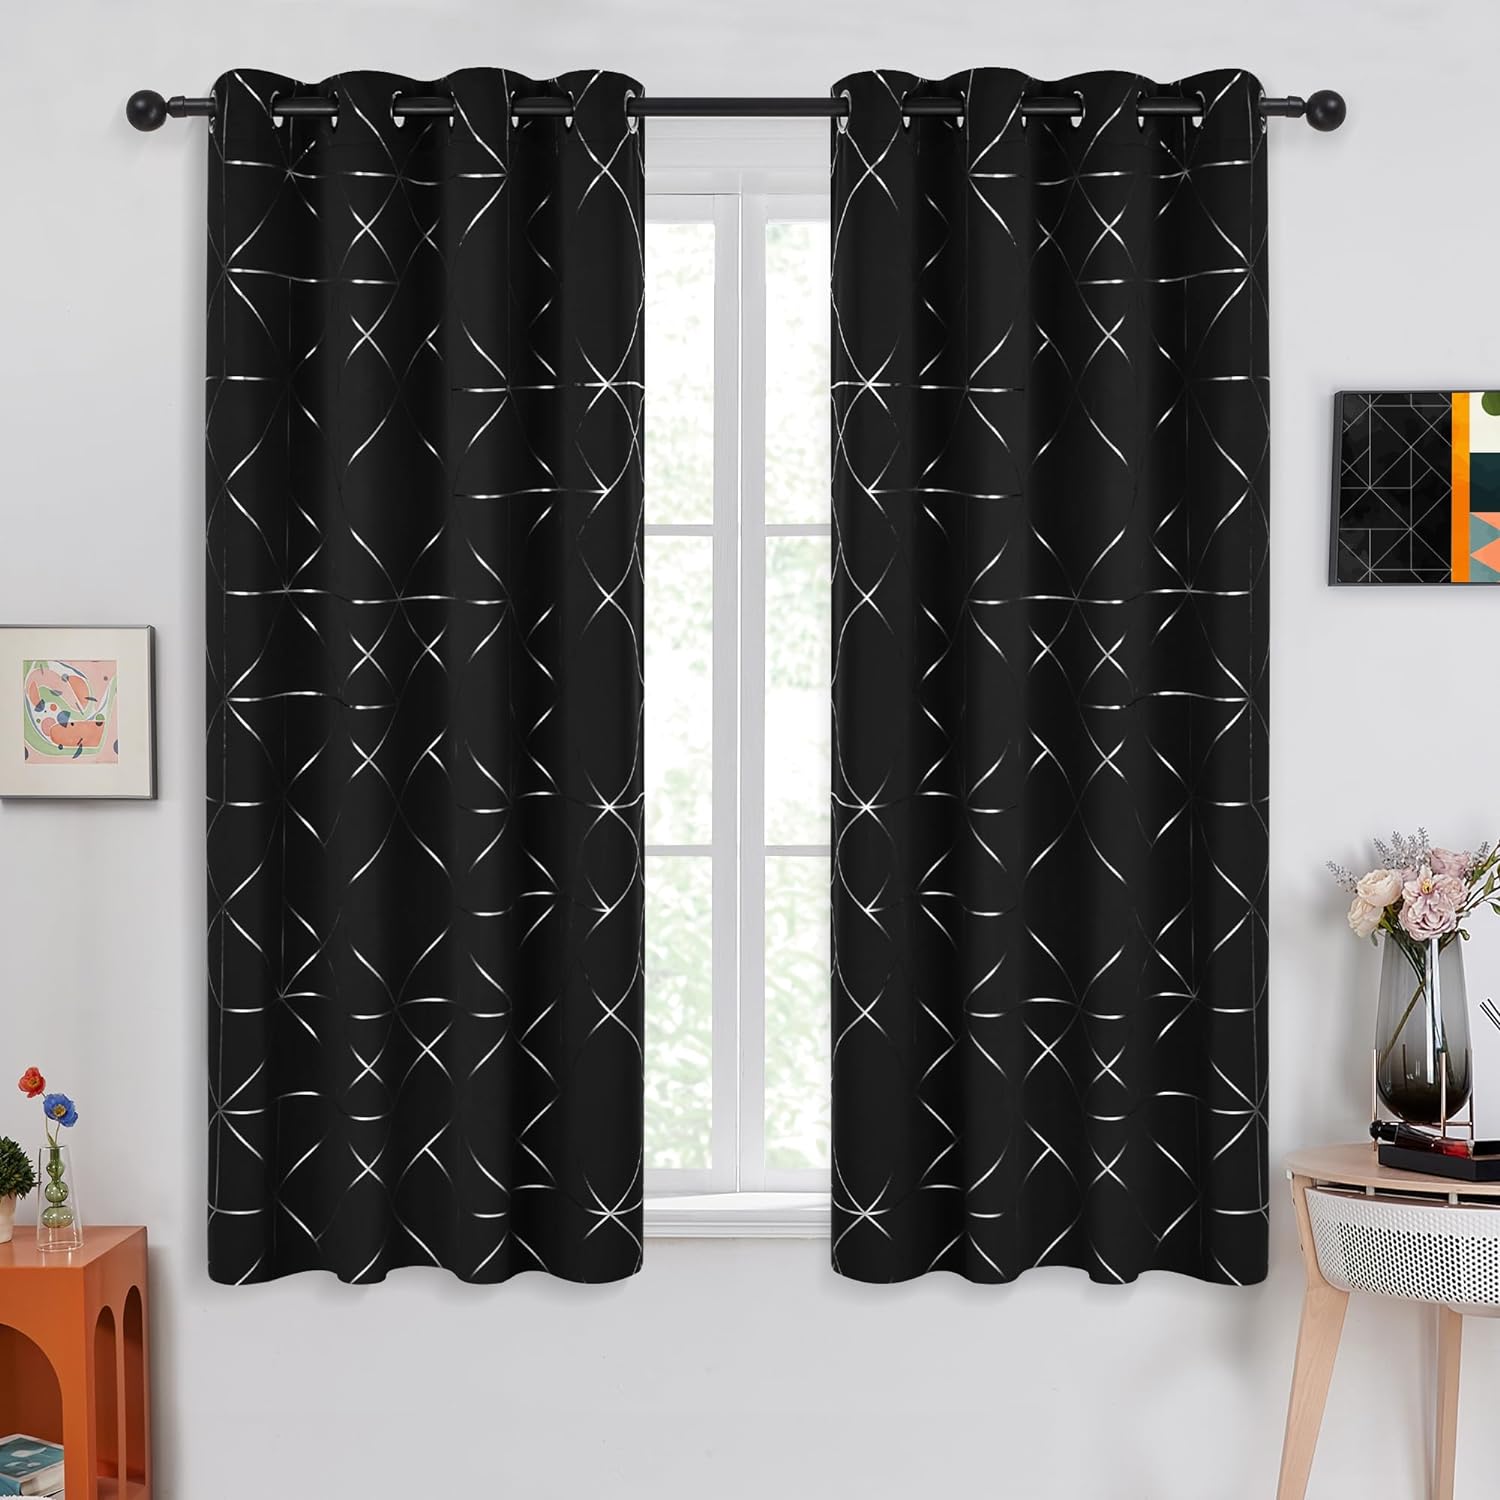 2-Pack Deconovo Long Thermal Insulated Blackout Curtains (Two Patterns) from $9.79 + Free Shipping w/ Prime or $35+ orders